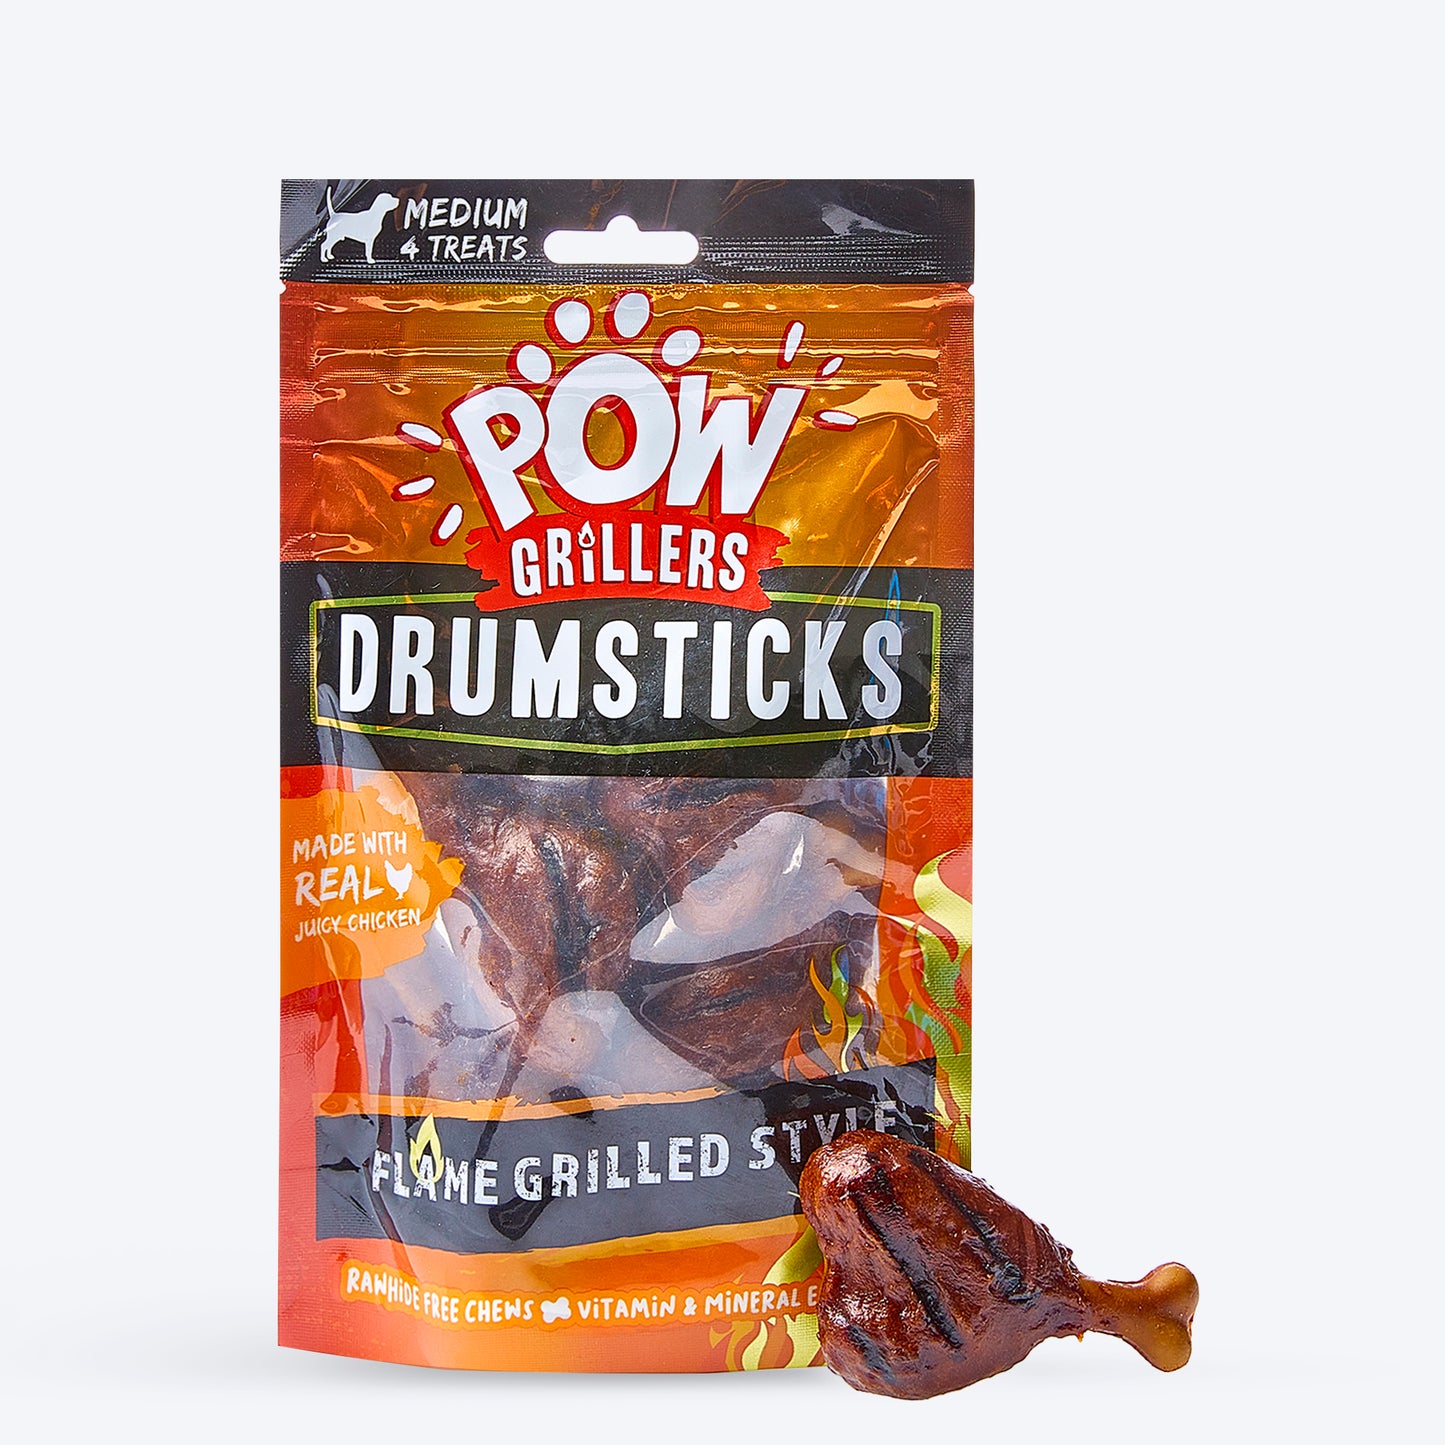 Pow Meaty Middle Grillers Kebabs Made With Real Juicy Chicken Treat For Dog - 115 gm - Heads Up For Tails